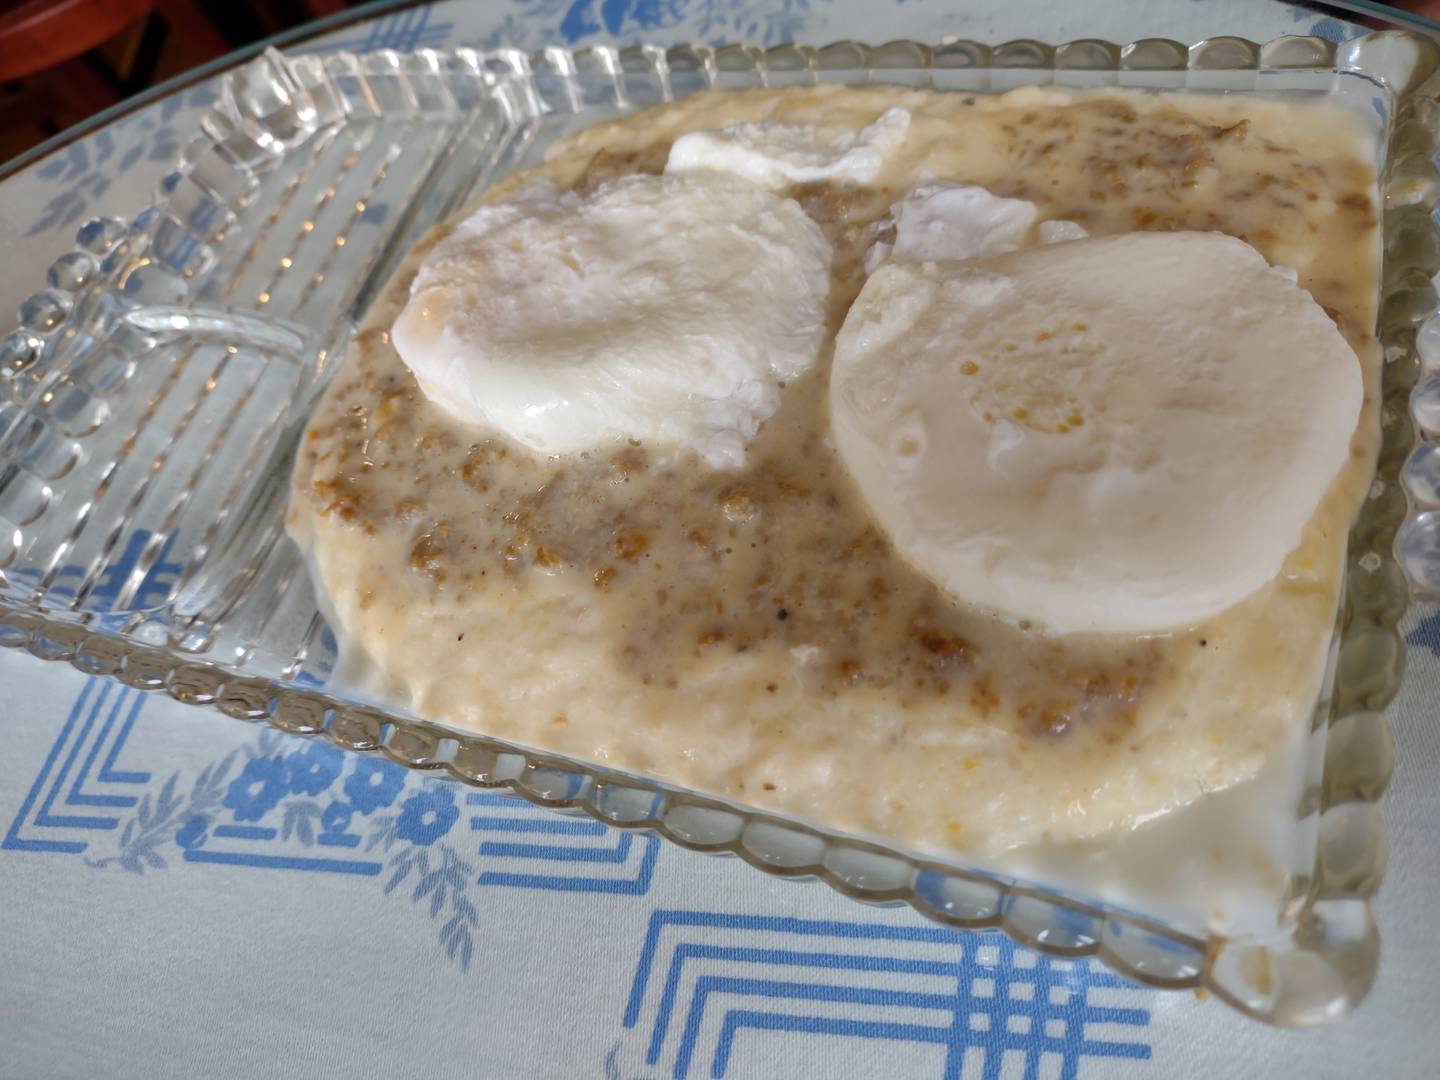 The Dixie Land at Good Morning Good Day Cafe in Streator offers two eggs, either poached or fried, over a bed of southern style grits full of cheddar cheese and crumbled sausage.